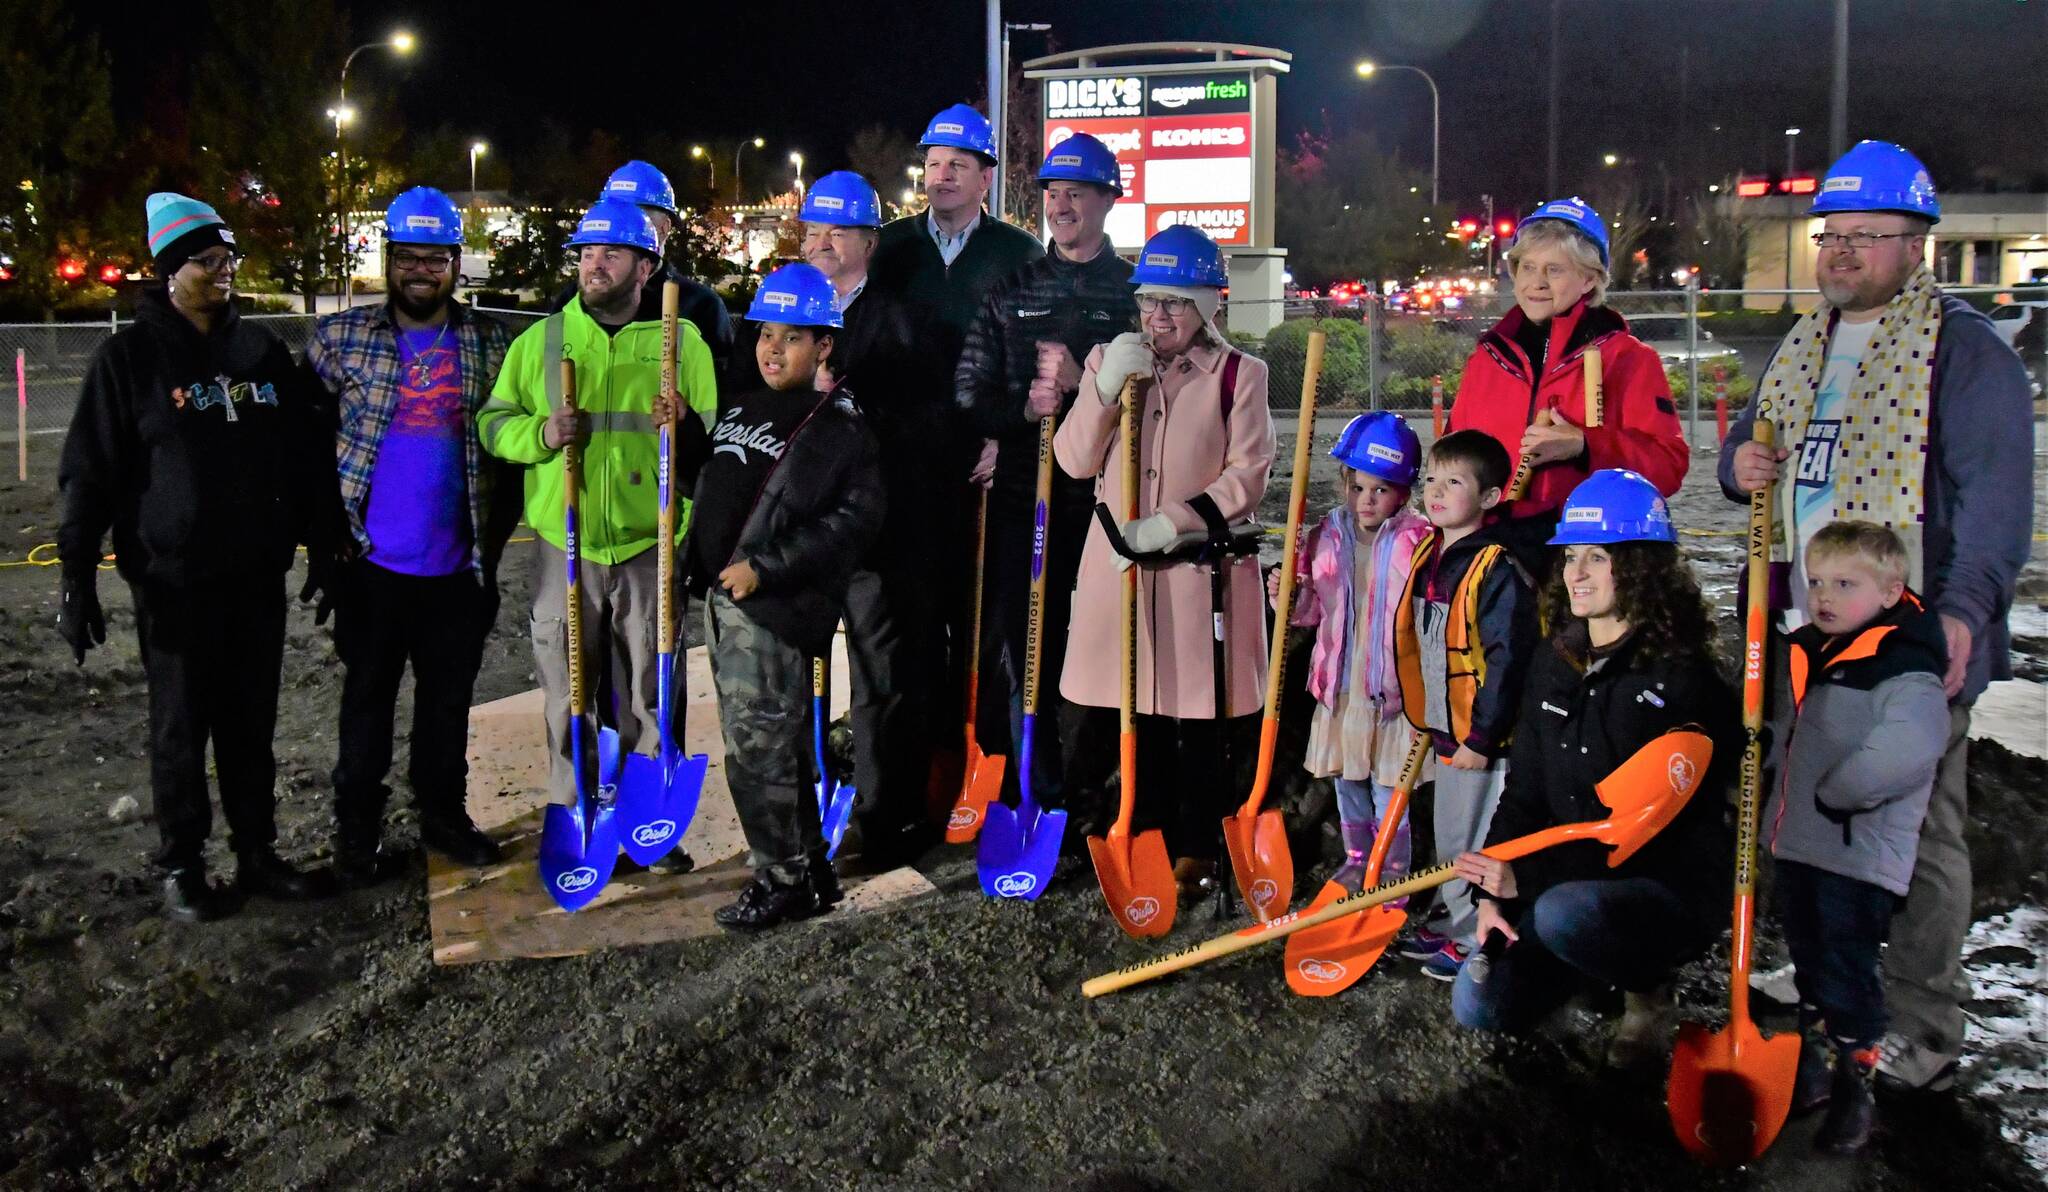 Photo by Bruce Honda
Elected officials, project leaders, community members and President Jasmine Donovan, kneeling in front, prepare to break ground on Nov. 3.